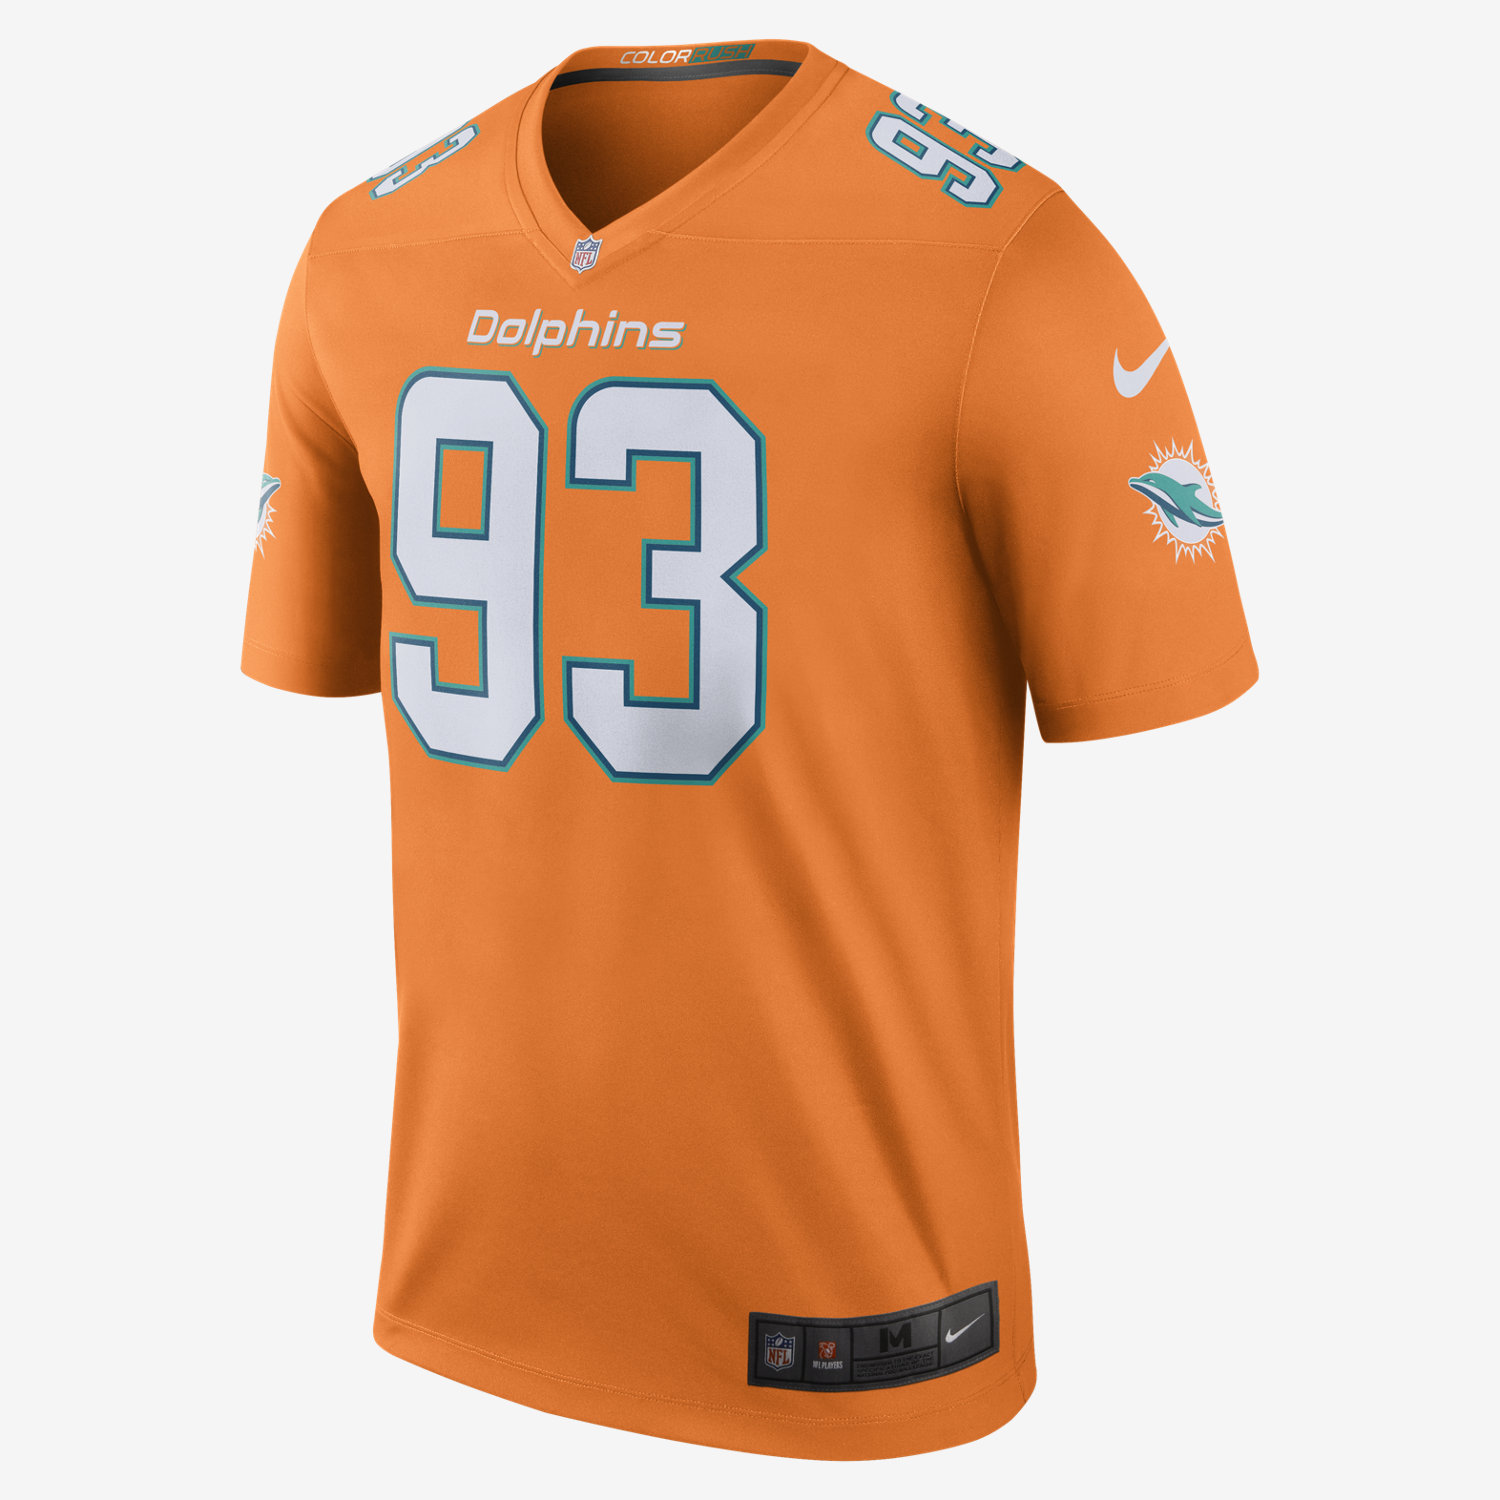 panthers jersey colors 2016